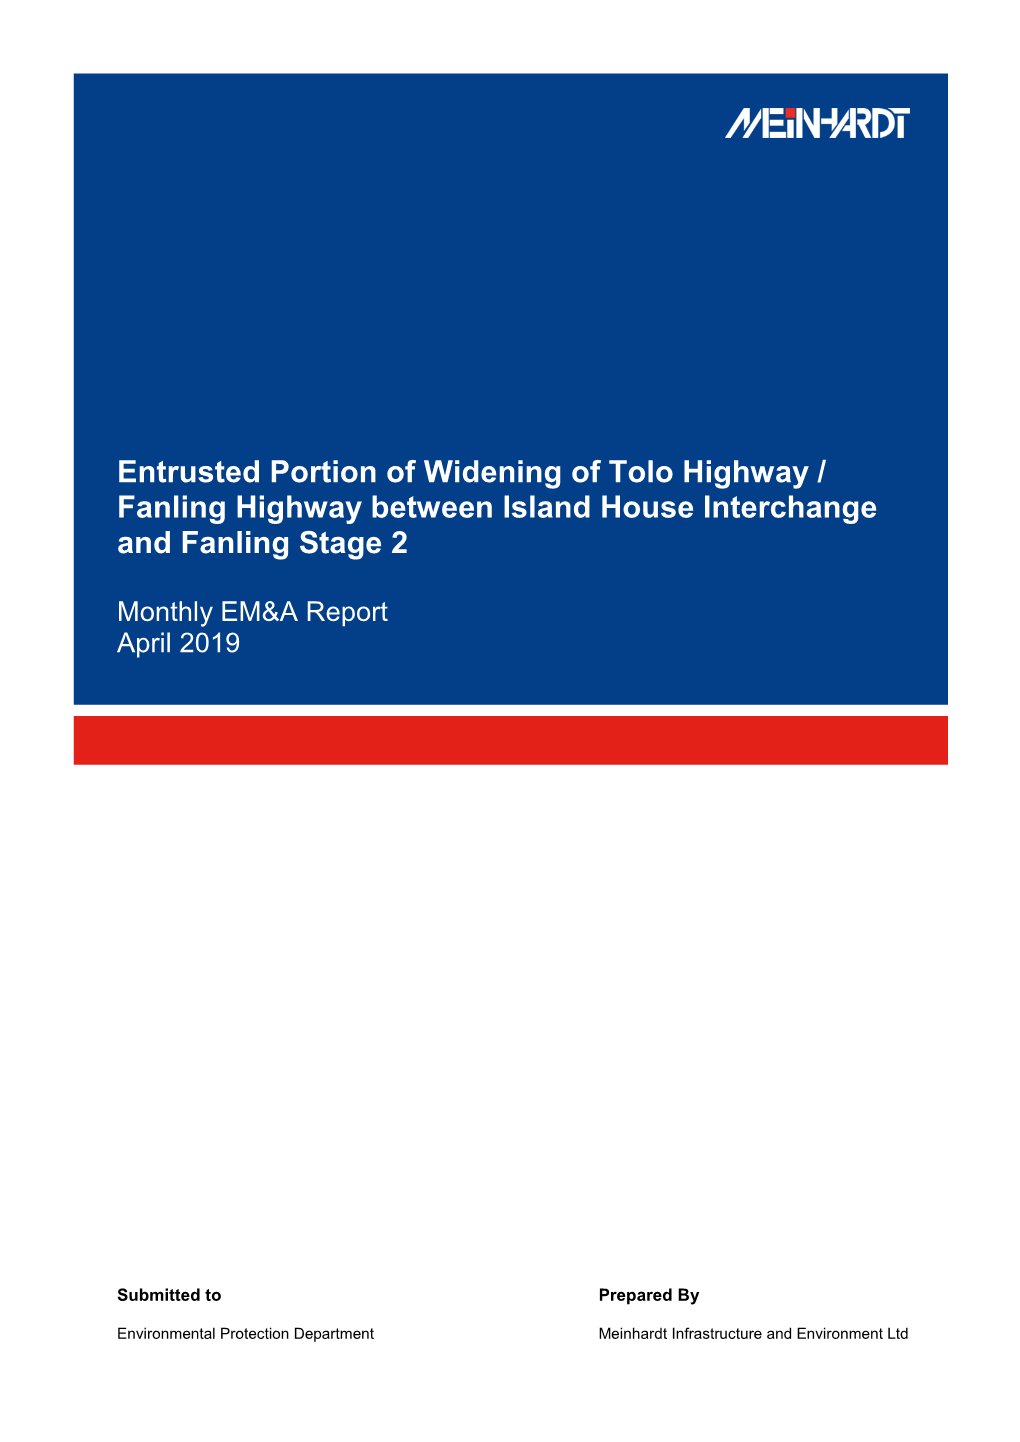 Entrusted Portion of Widening of Tolo Highway / Fanling Highway Between Island House Interchange and Fanling Stage 2